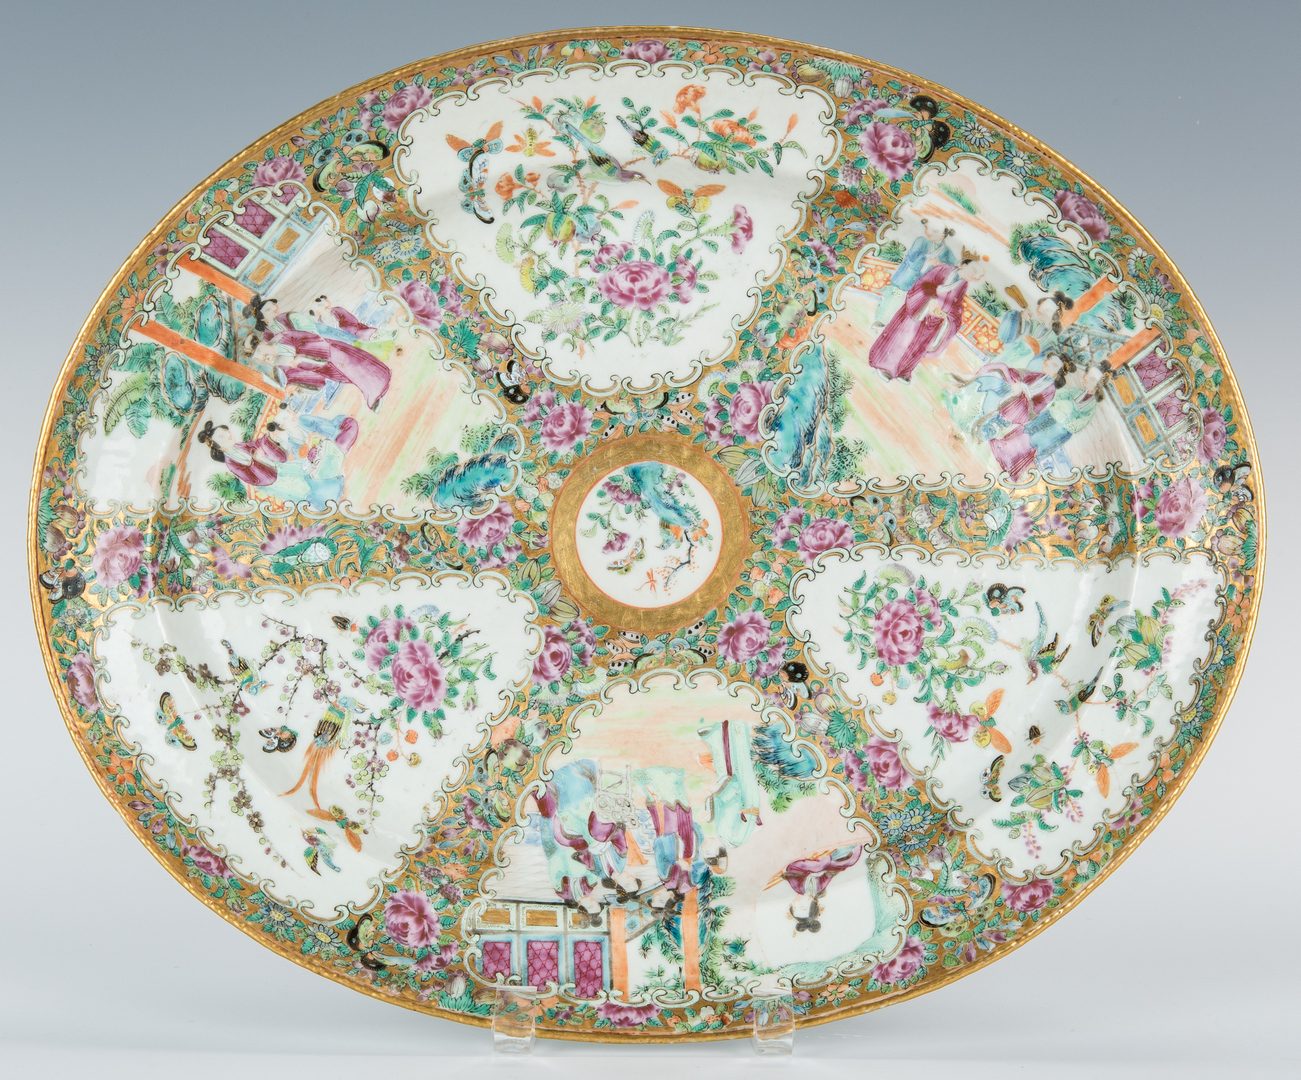 Lot 251: Rose Medallion Platter and Compote